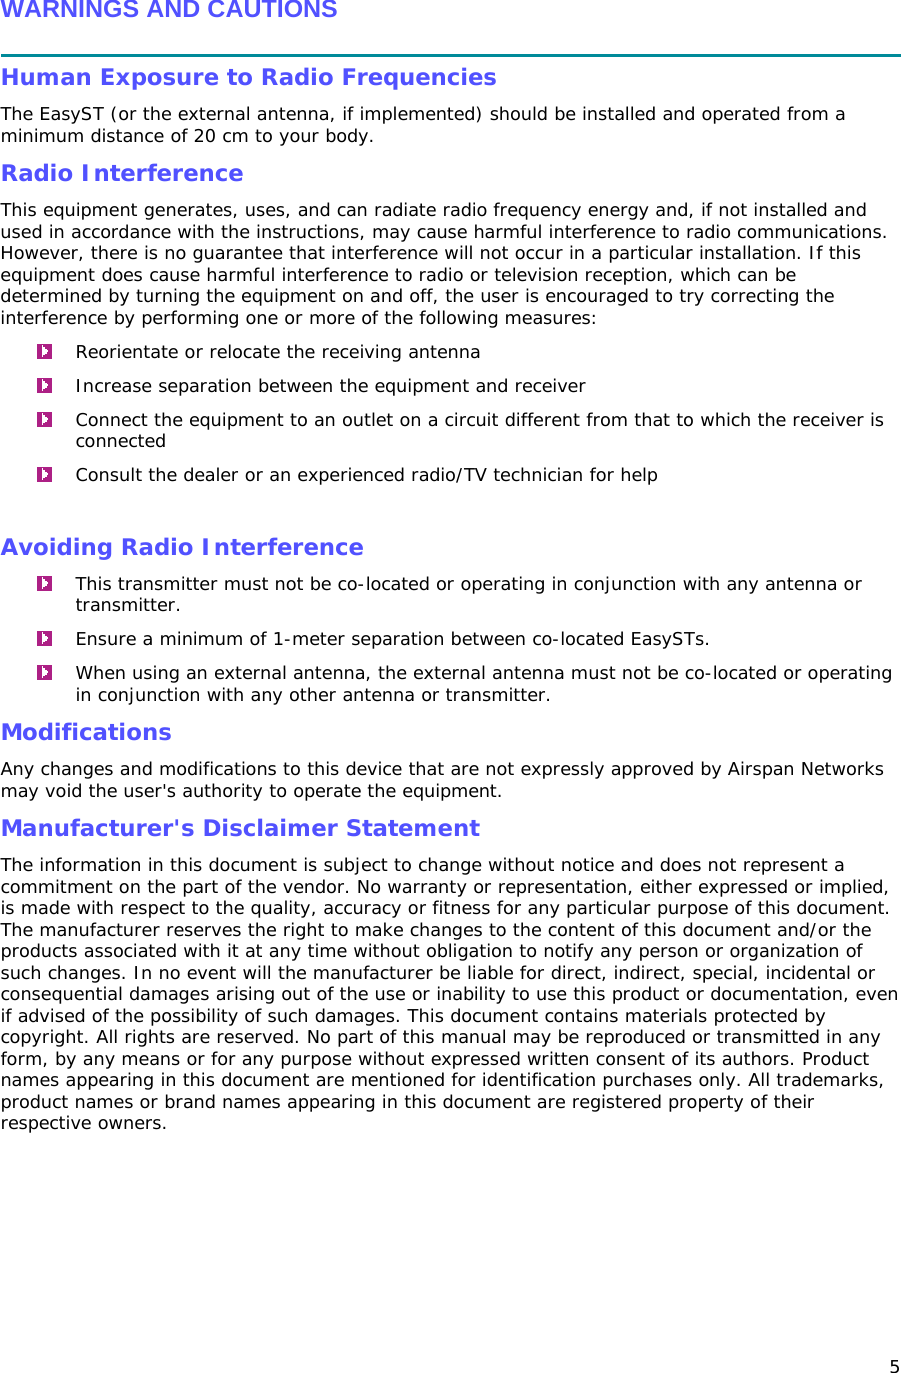 5  WARNINGS AND CAUTIONS  Human Exposure to Radio Frequencies The EasyST (or the external antenna, if implemented) should be installed and operated from a minimum distance of 20 cm to your body. Radio Interference This equipment generates, uses, and can radiate radio frequency energy and, if not installed and used in accordance with the instructions, may cause harmful interference to radio communications. However, there is no guarantee that interference will not occur in a particular installation. If this equipment does cause harmful interference to radio or television reception, which can be determined by turning the equipment on and off, the user is encouraged to try correcting the interference by performing one or more of the following measures:  Reorientate or relocate the receiving antenna   Increase separation between the equipment and receiver   Connect the equipment to an outlet on a circuit different from that to which the receiver is connected   Consult the dealer or an experienced radio/TV technician for help  Avoiding Radio Interference   This transmitter must not be co-located or operating in conjunction with any antenna or transmitter.   Ensure a minimum of 1-meter separation between co-located EasySTs.  When using an external antenna, the external antenna must not be co-located or operating in conjunction with any other antenna or transmitter. Modifications Any changes and modifications to this device that are not expressly approved by Airspan Networks may void the user&apos;s authority to operate the equipment. Manufacturer&apos;s Disclaimer Statement  The information in this document is subject to change without notice and does not represent a commitment on the part of the vendor. No warranty or representation, either expressed or implied, is made with respect to the quality, accuracy or fitness for any particular purpose of this document. The manufacturer reserves the right to make changes to the content of this document and/or the products associated with it at any time without obligation to notify any person or organization of such changes. In no event will the manufacturer be liable for direct, indirect, special, incidental or consequential damages arising out of the use or inability to use this product or documentation, even if advised of the possibility of such damages. This document contains materials protected by copyright. All rights are reserved. No part of this manual may be reproduced or transmitted in any form, by any means or for any purpose without expressed written consent of its authors. Product names appearing in this document are mentioned for identification purchases only. All trademarks, product names or brand names appearing in this document are registered property of their respective owners.  